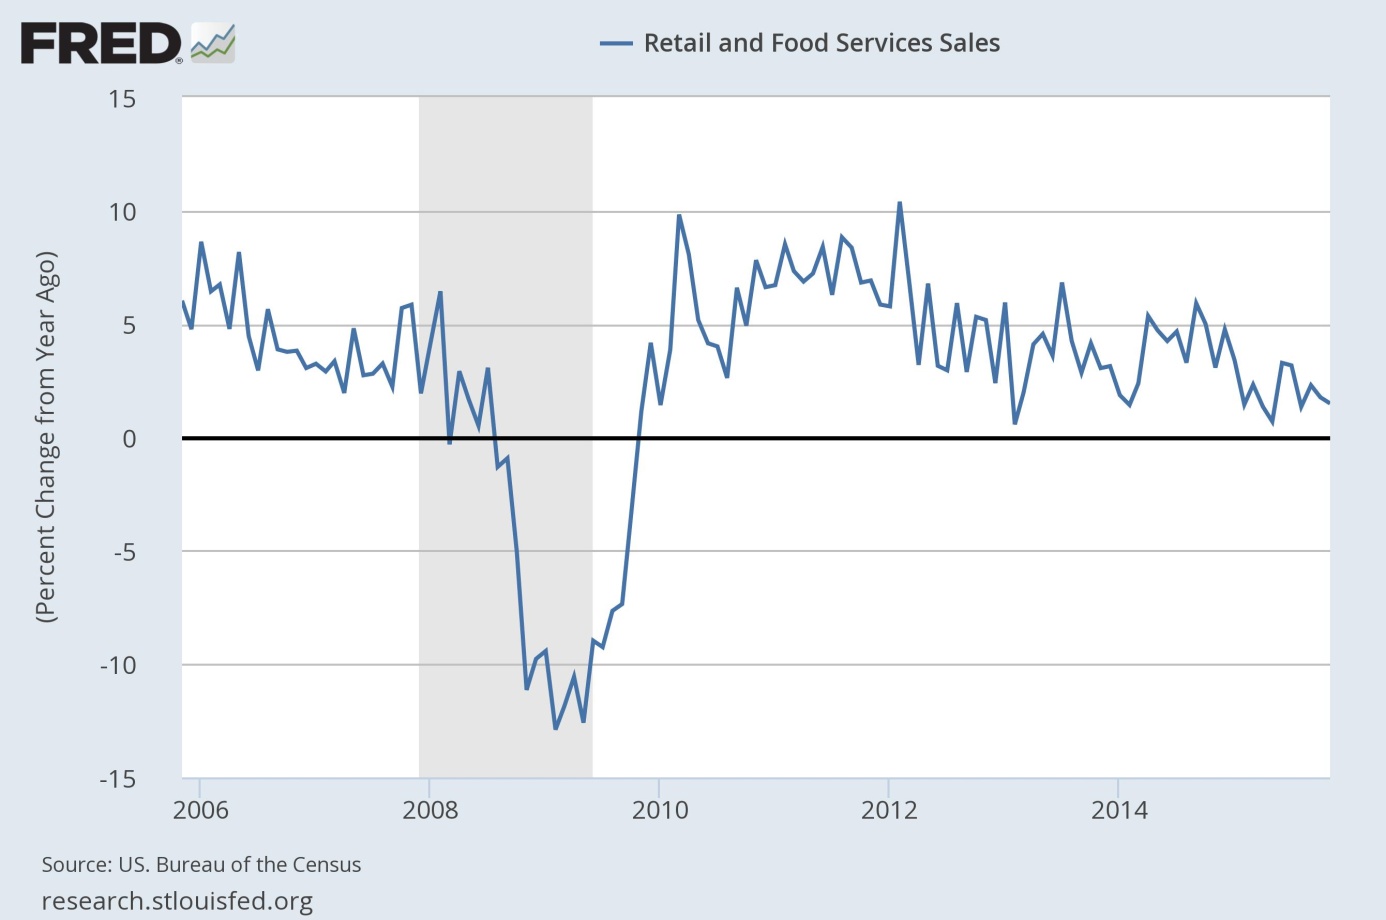 Retail and food services sales (percent change from year ago) from 2005 to 2015.